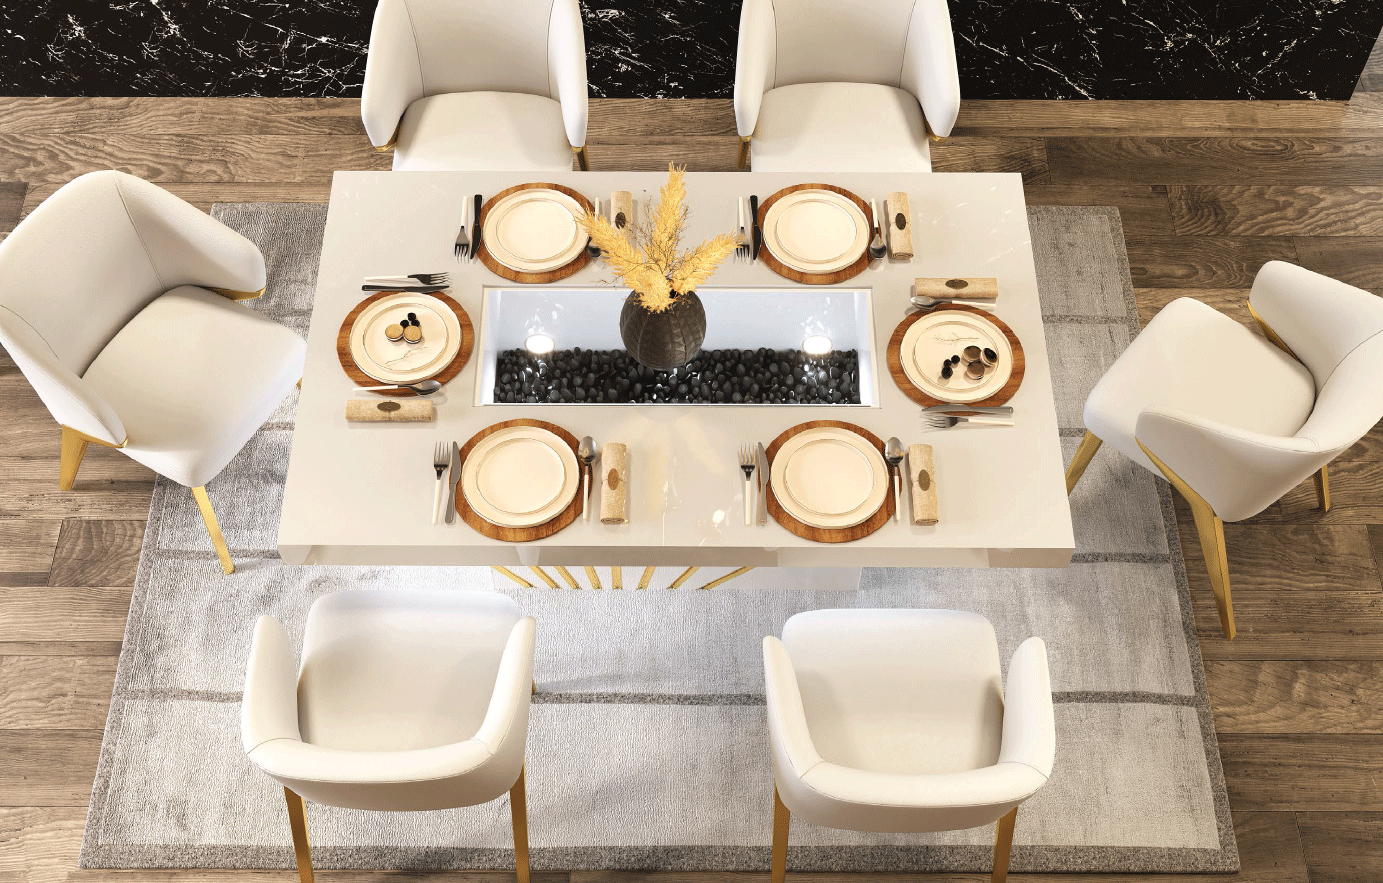 Brands Franco ENZO Dining and Wall Units, Spain Oro White Dining room Additional Items